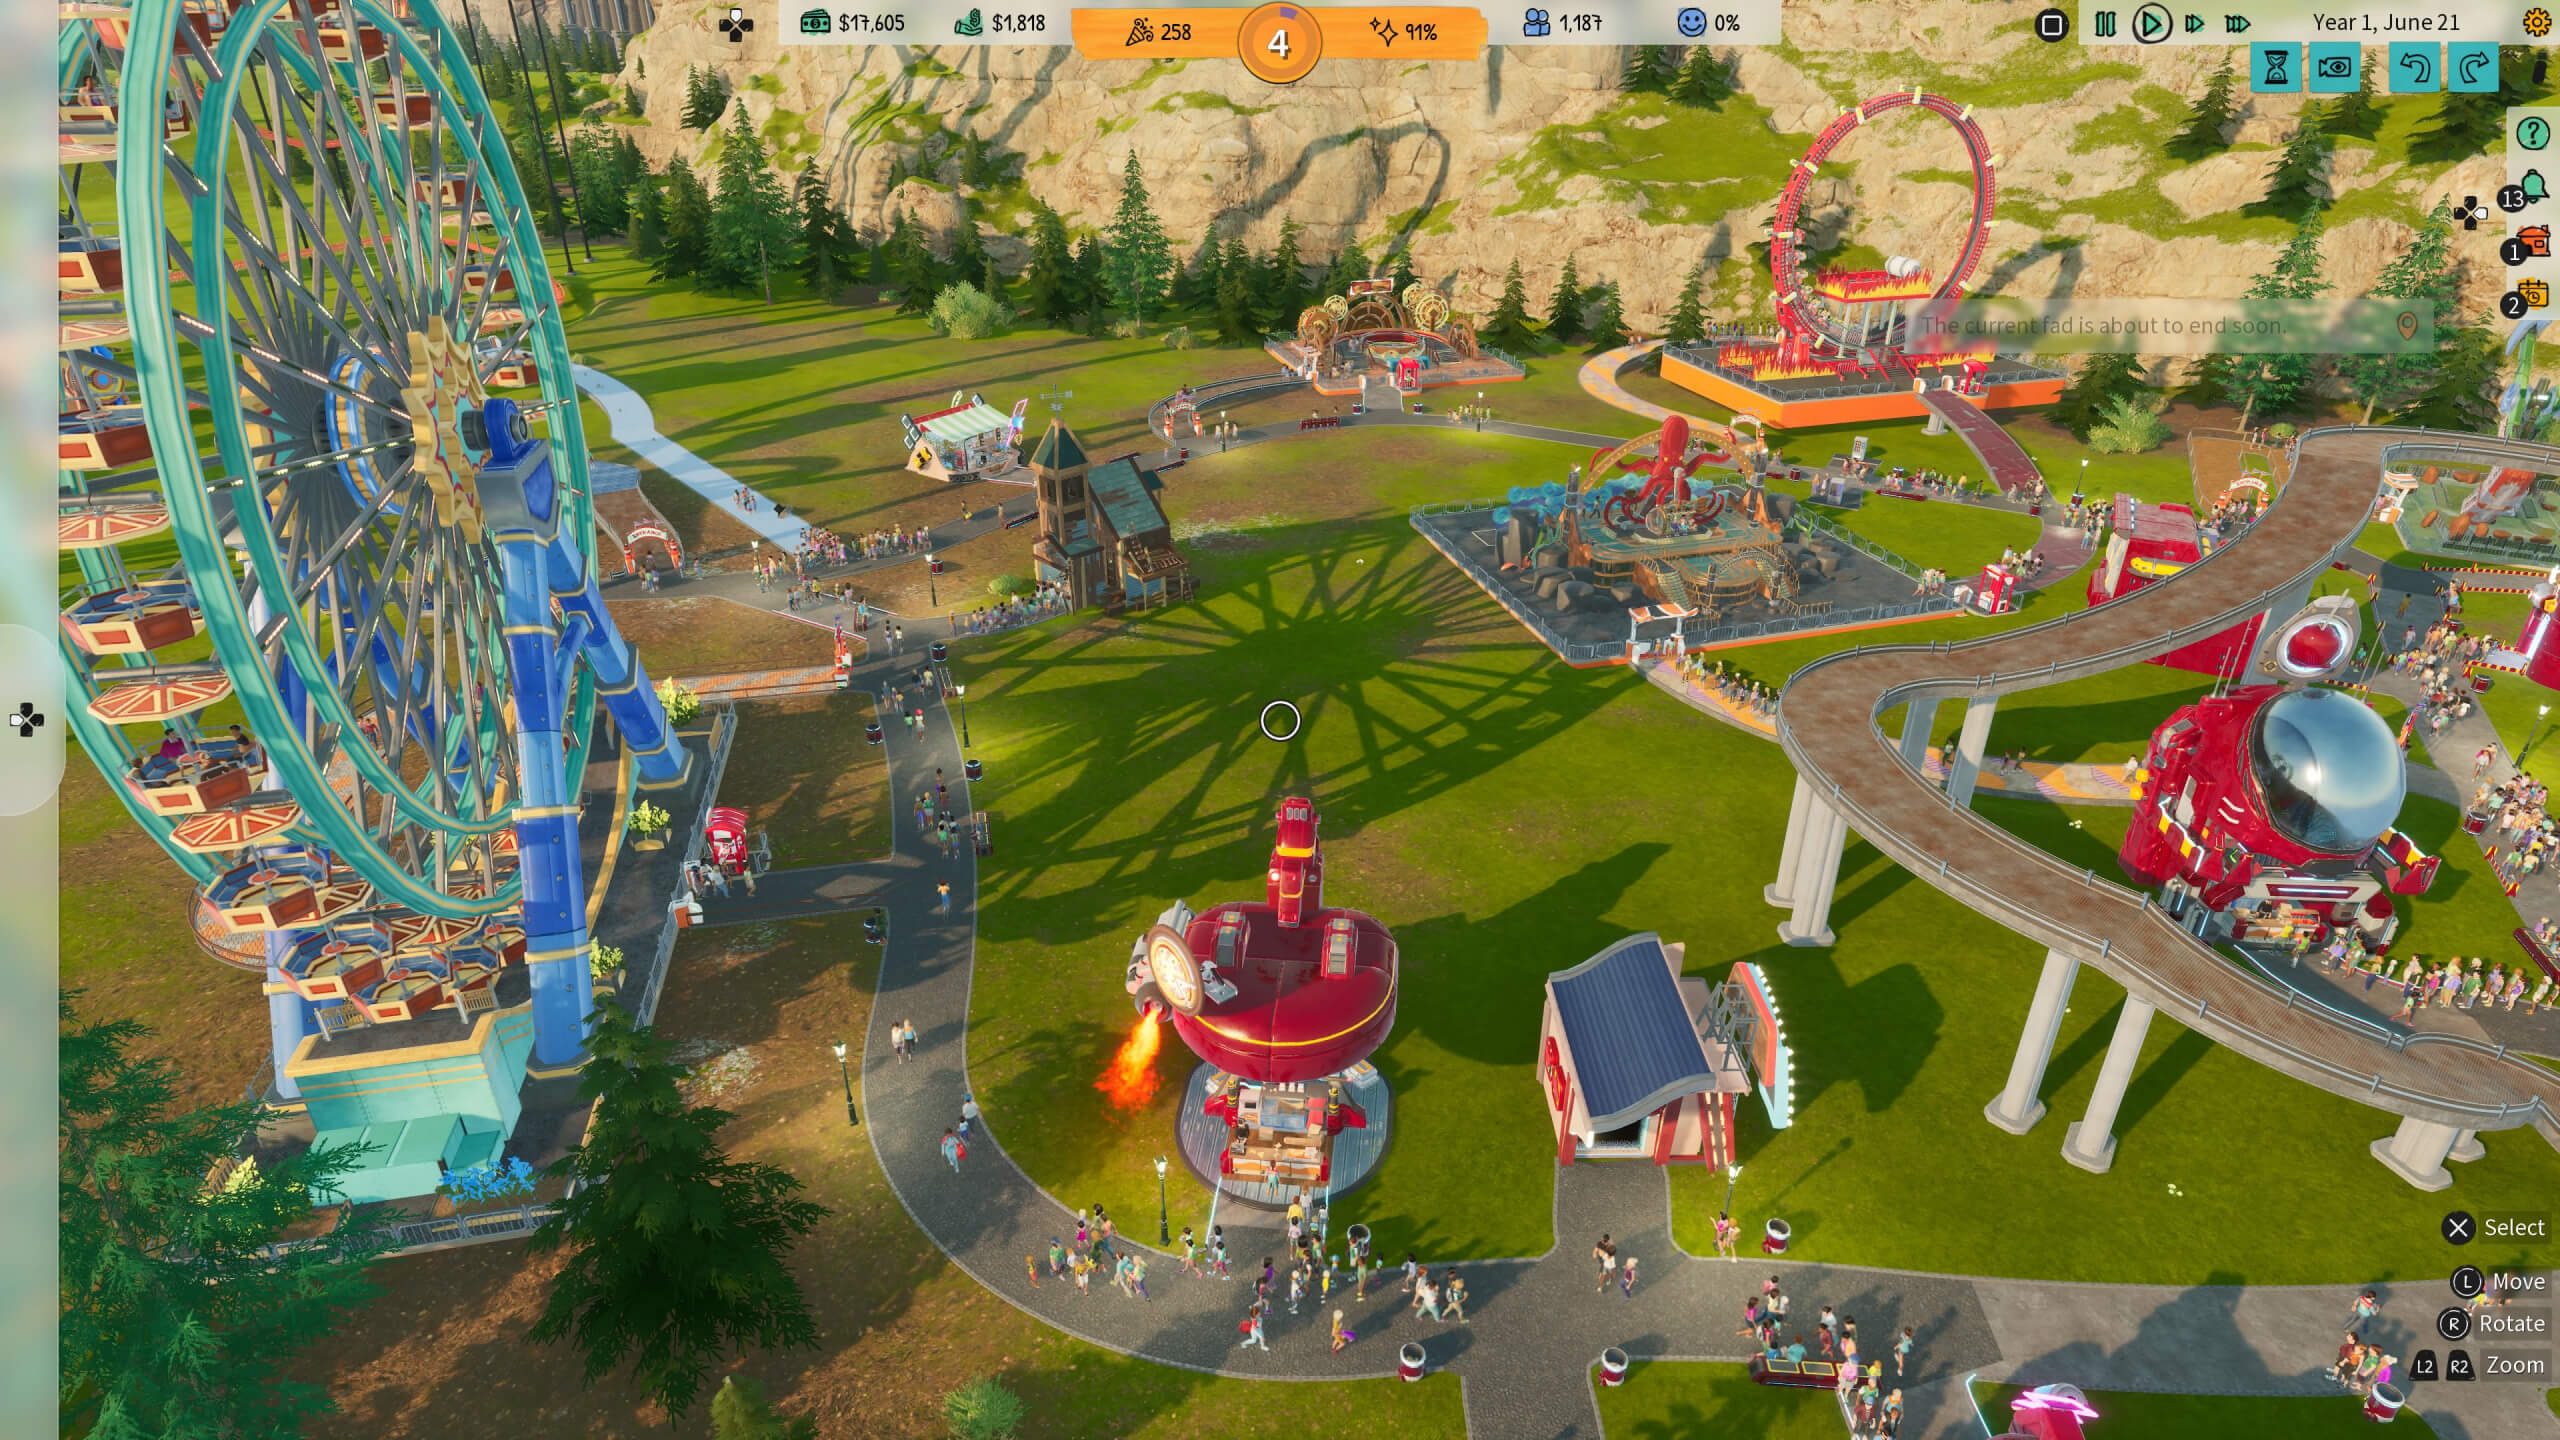 A Theme Park showing a variety of different rides including a ferris wheel. People walk along the winding paths in groups. There are also several food and drink booths available, At the top of the screen it shows your visitor count and park happiness. 